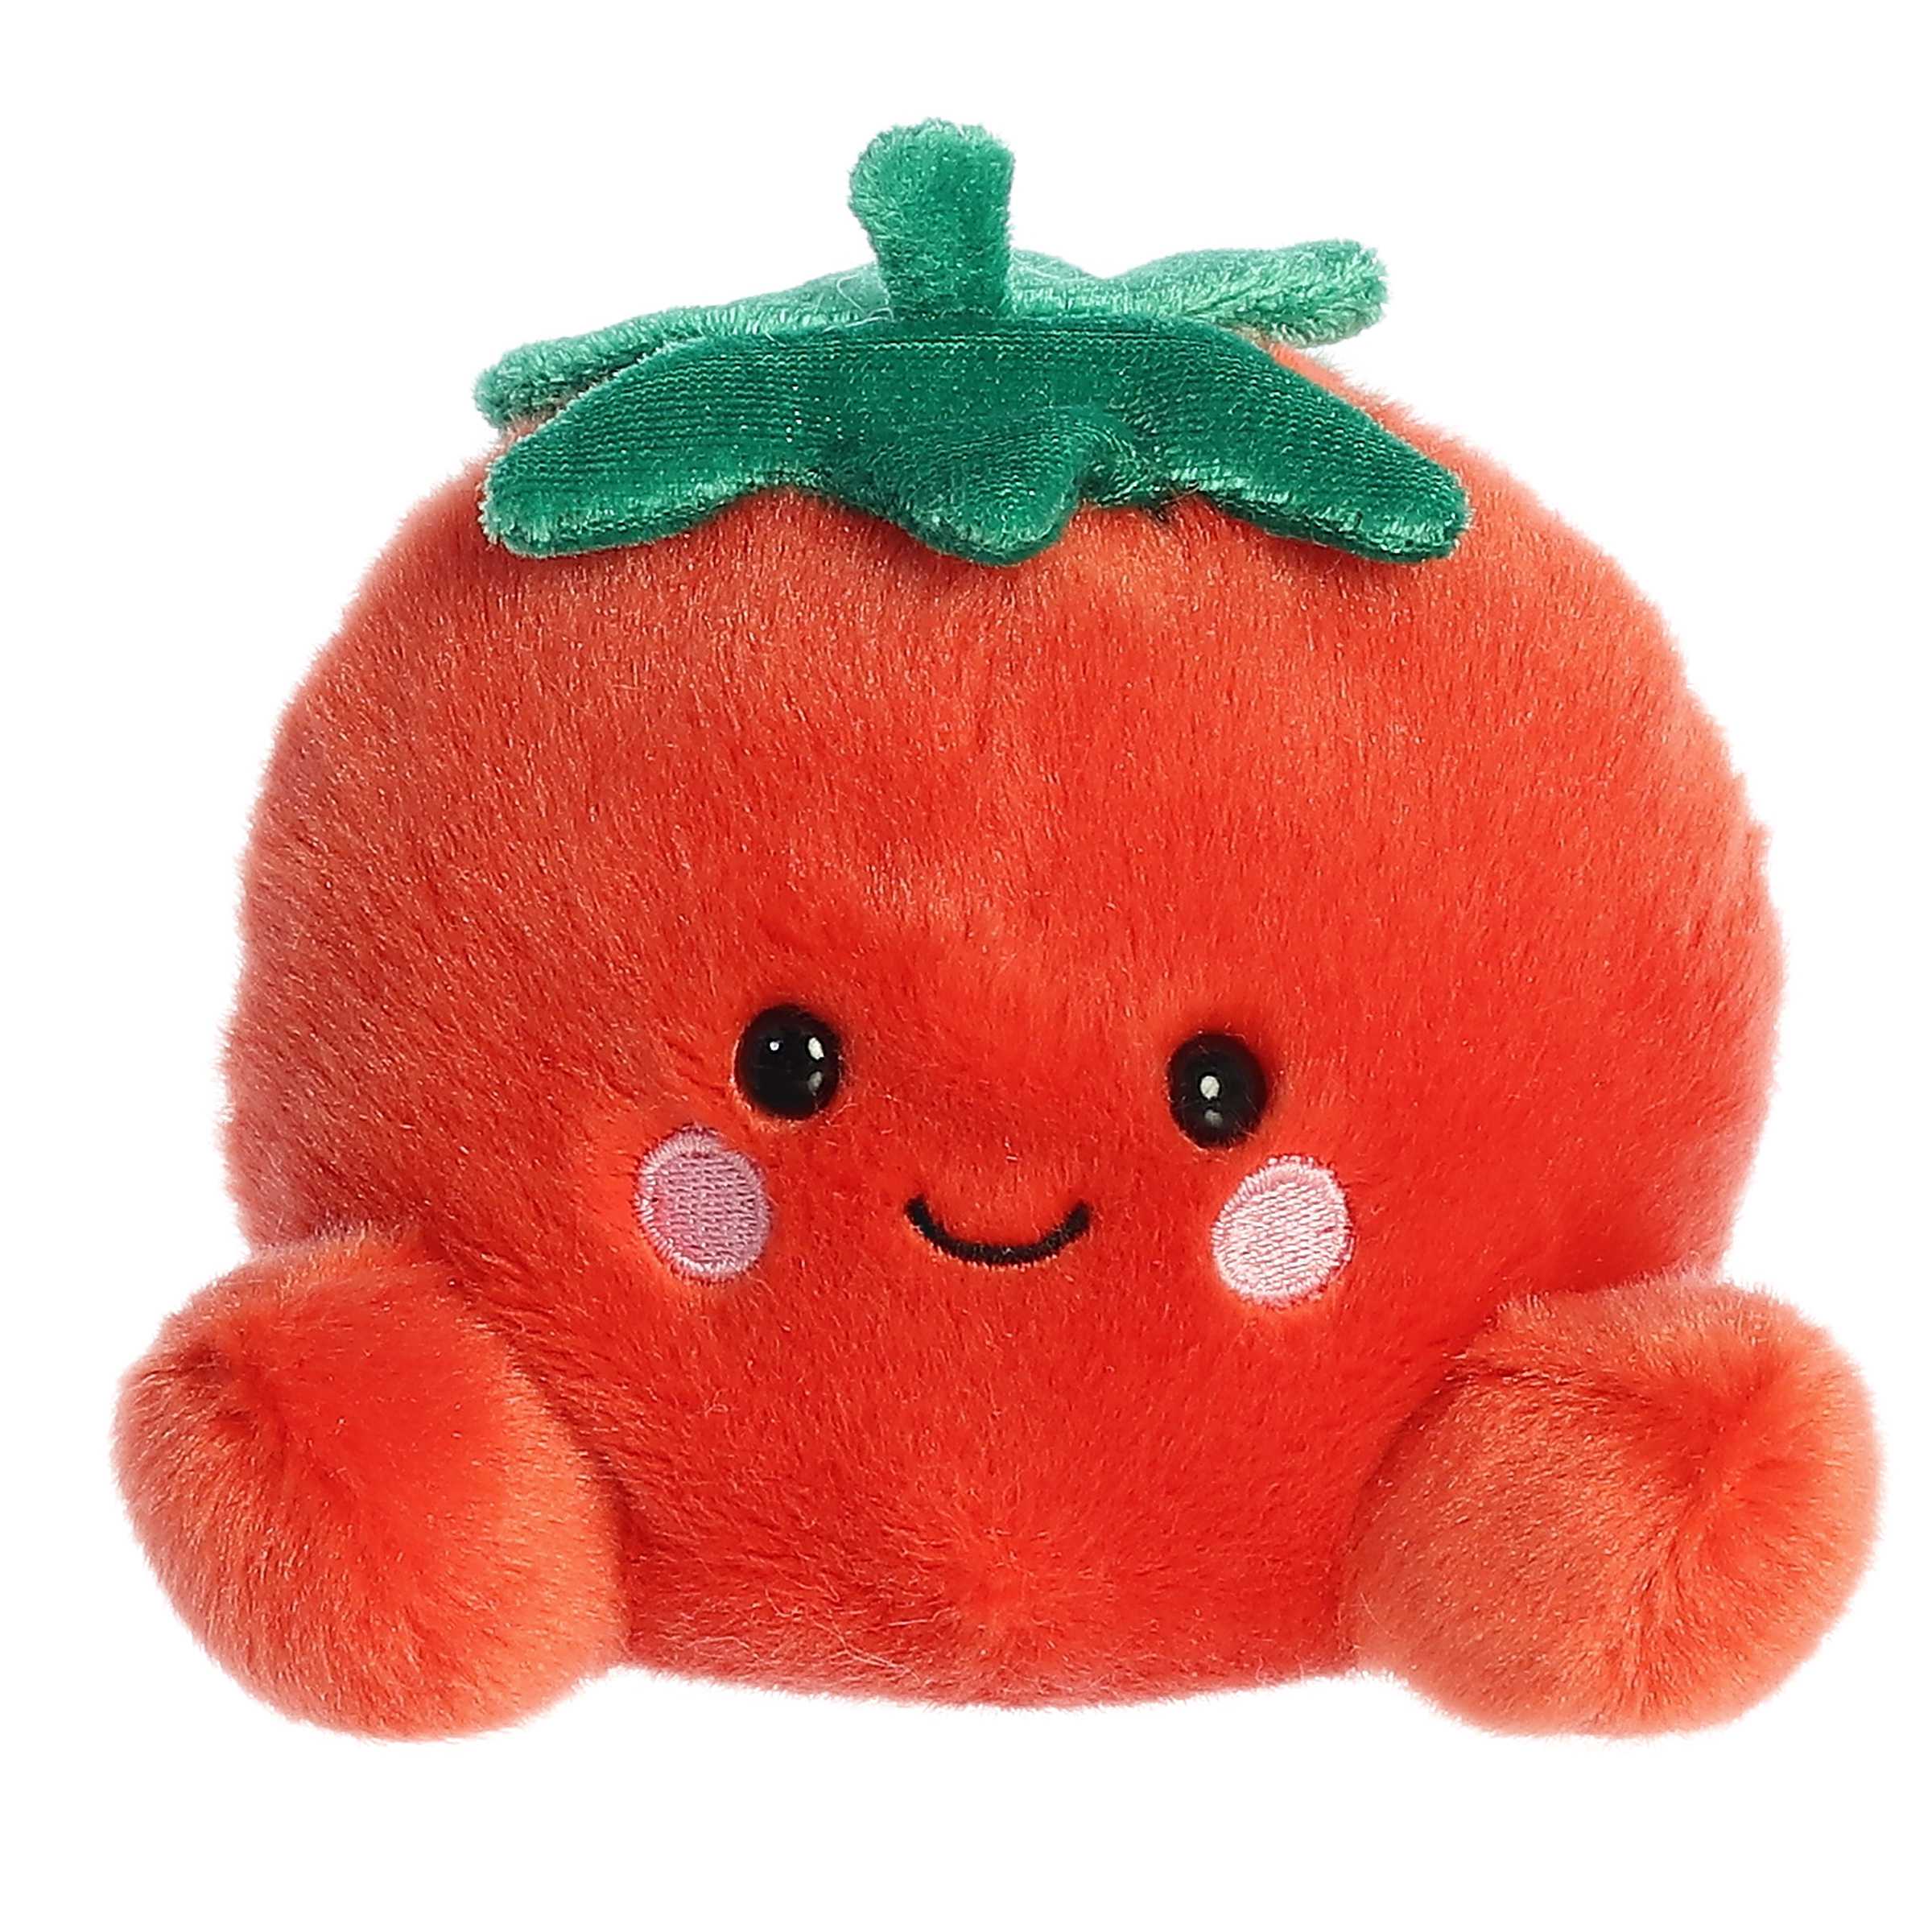 Playful mini tomato shaped plush toy with red fur body filled with bean pellets, green crown stem, and a smiling face design.